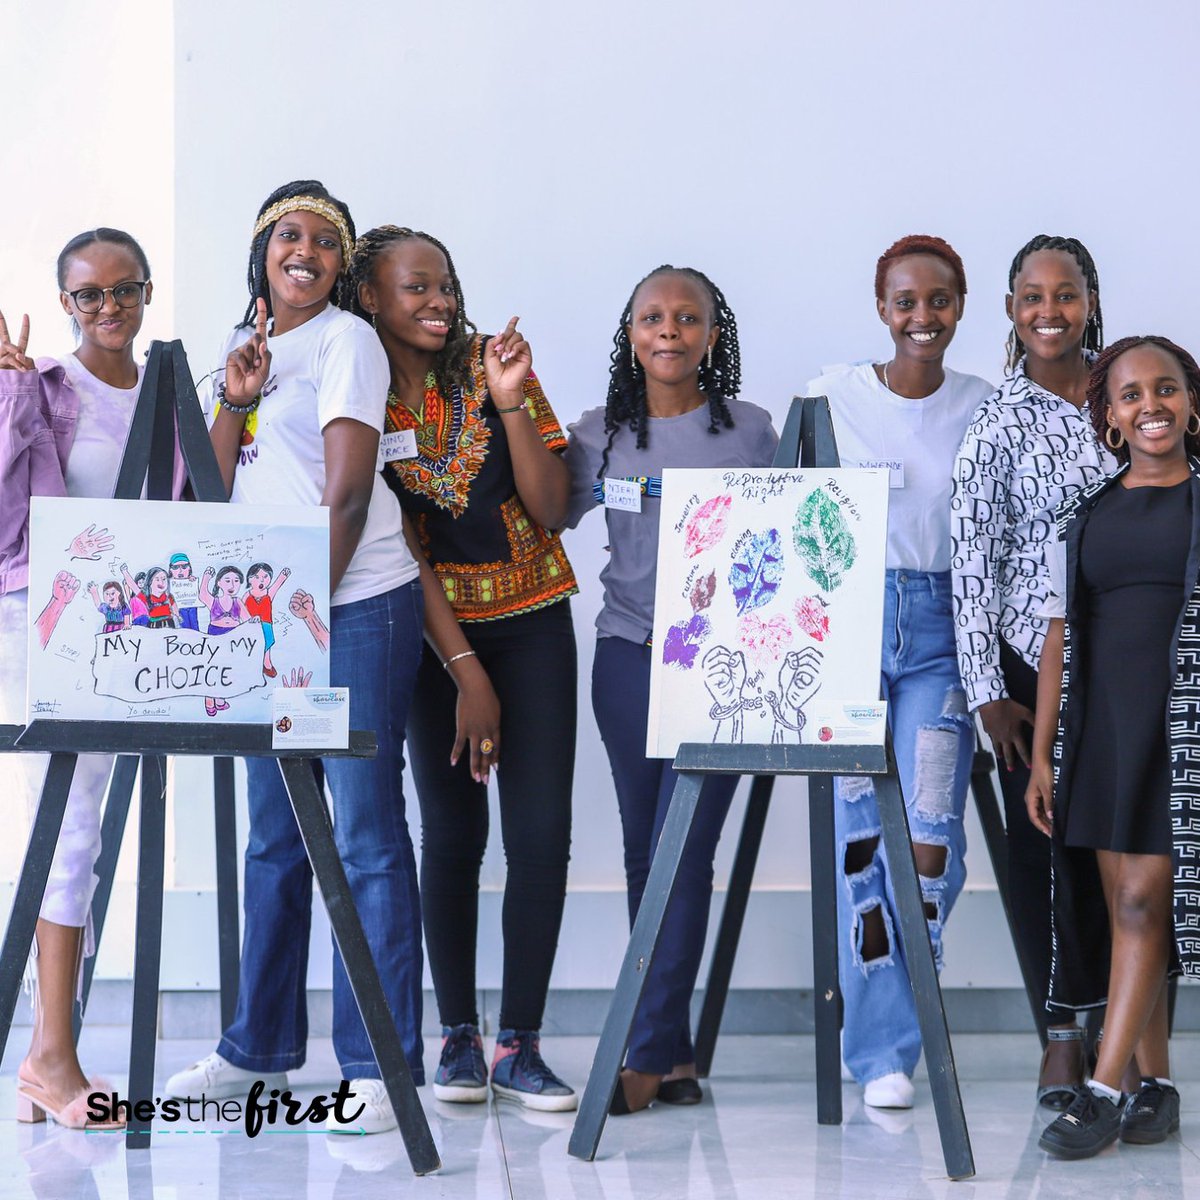 Reproduce This! was an art gallery experience in Nairobi and New York produced by a team of girls in support of girl artists. Through our Girl Activist Fellowship Program, they’ve spent the past year learning how to imagine, plan, and execute an activism campaign. ✨